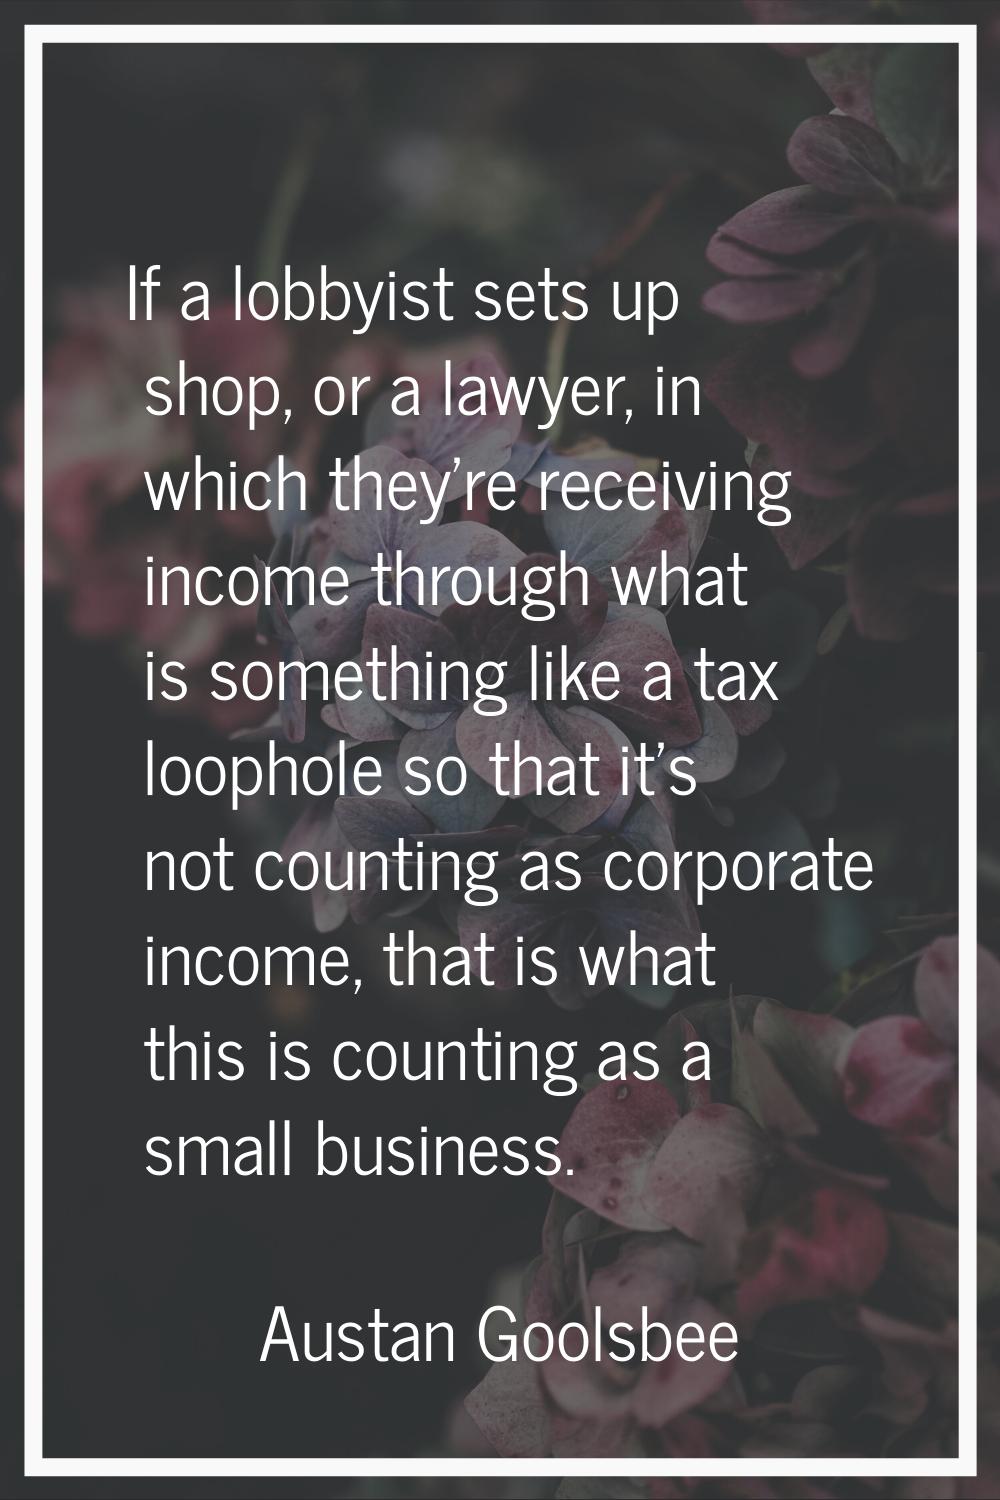 If a lobbyist sets up shop, or a lawyer, in which they're receiving income through what is somethin